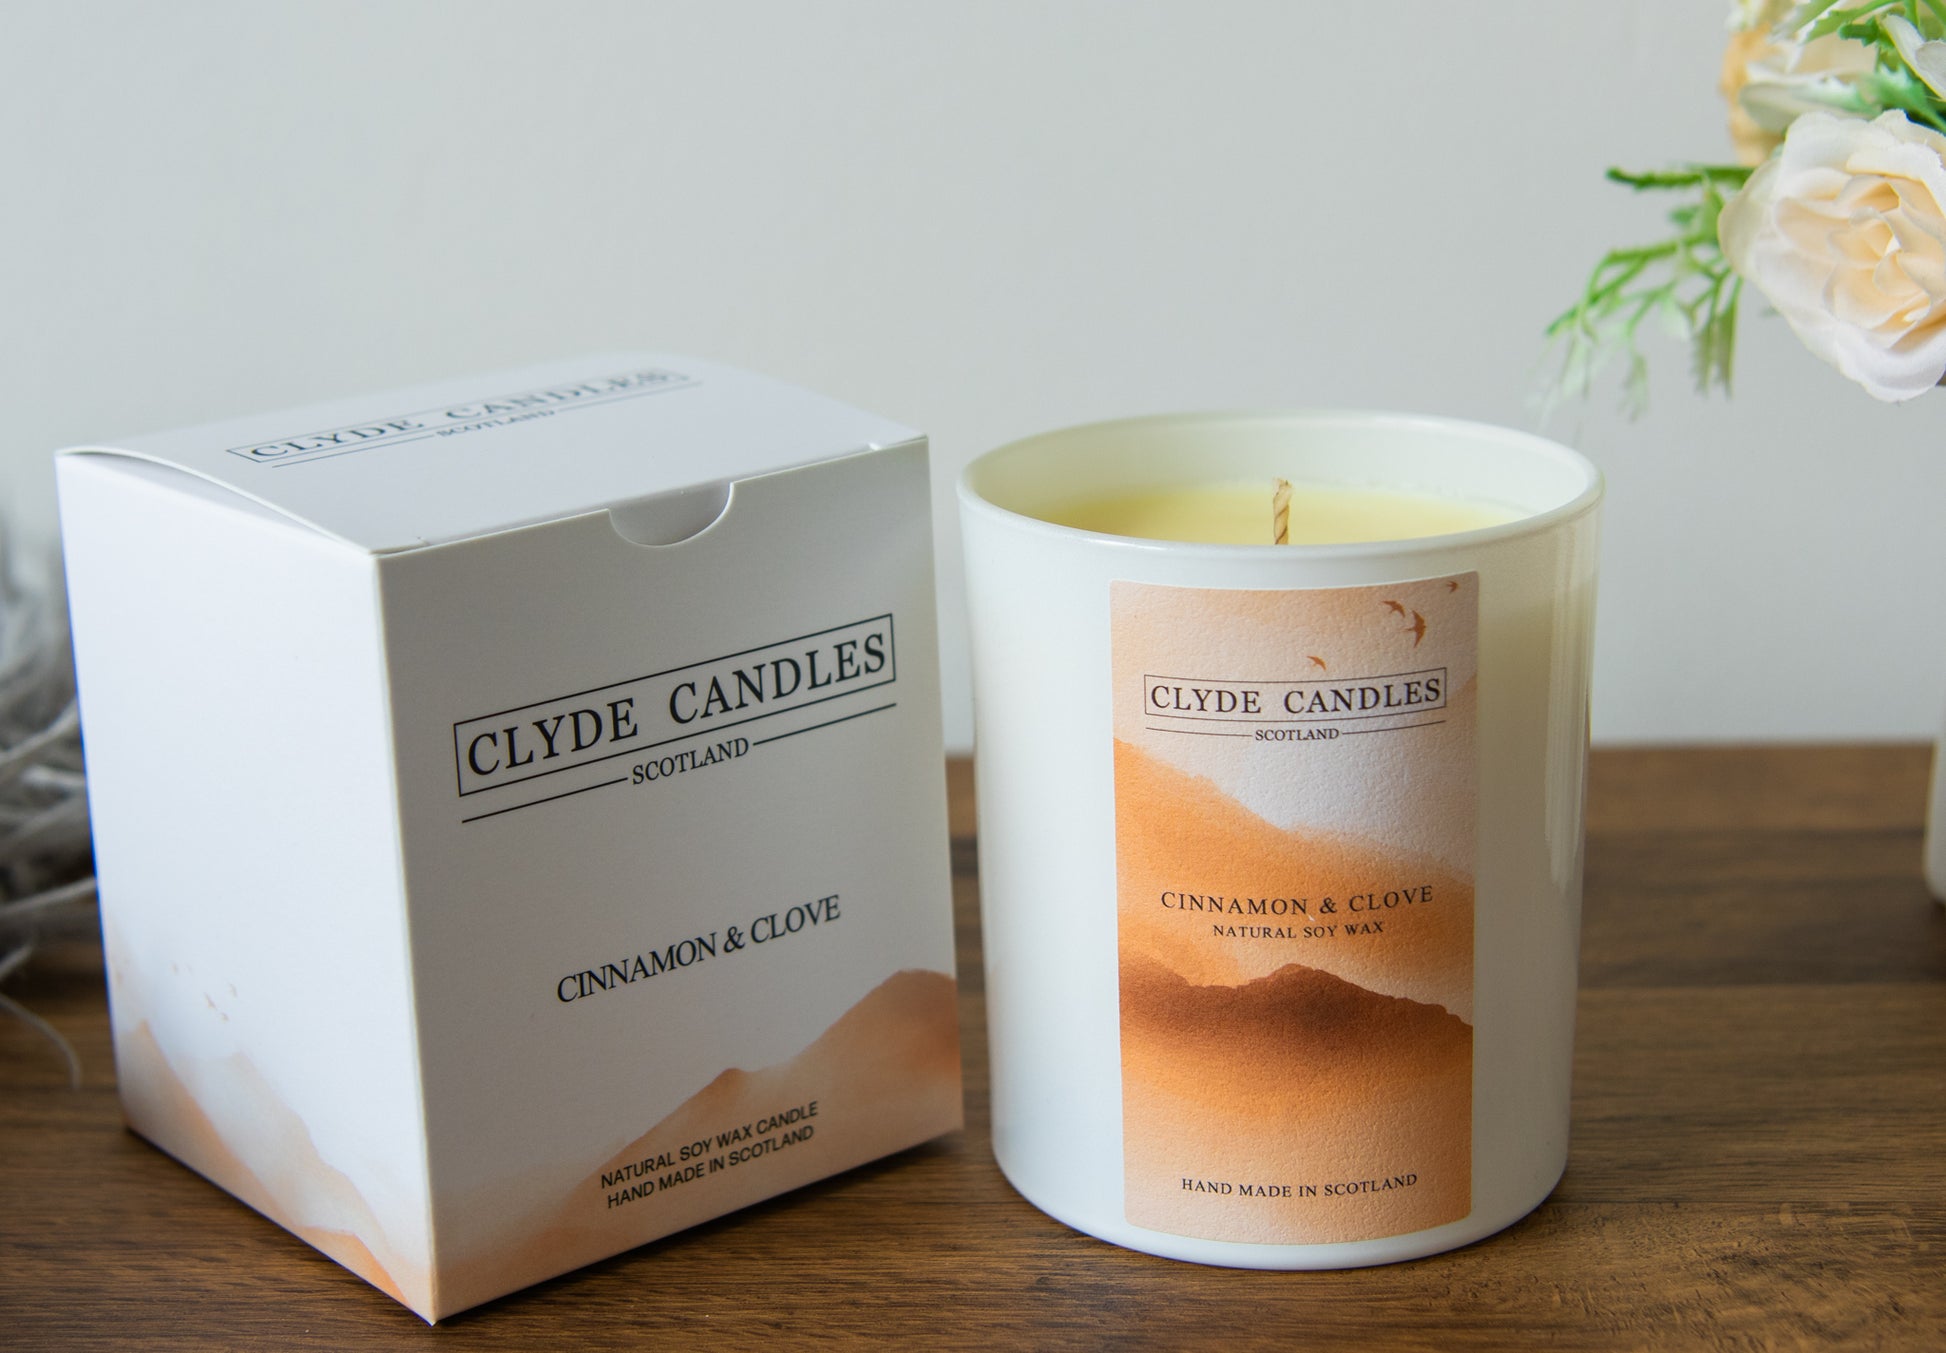 Cinnamon & Clove Gift Box Candle - Large Glass Natural Soy wax, Scottish Candles, Clyde Candles